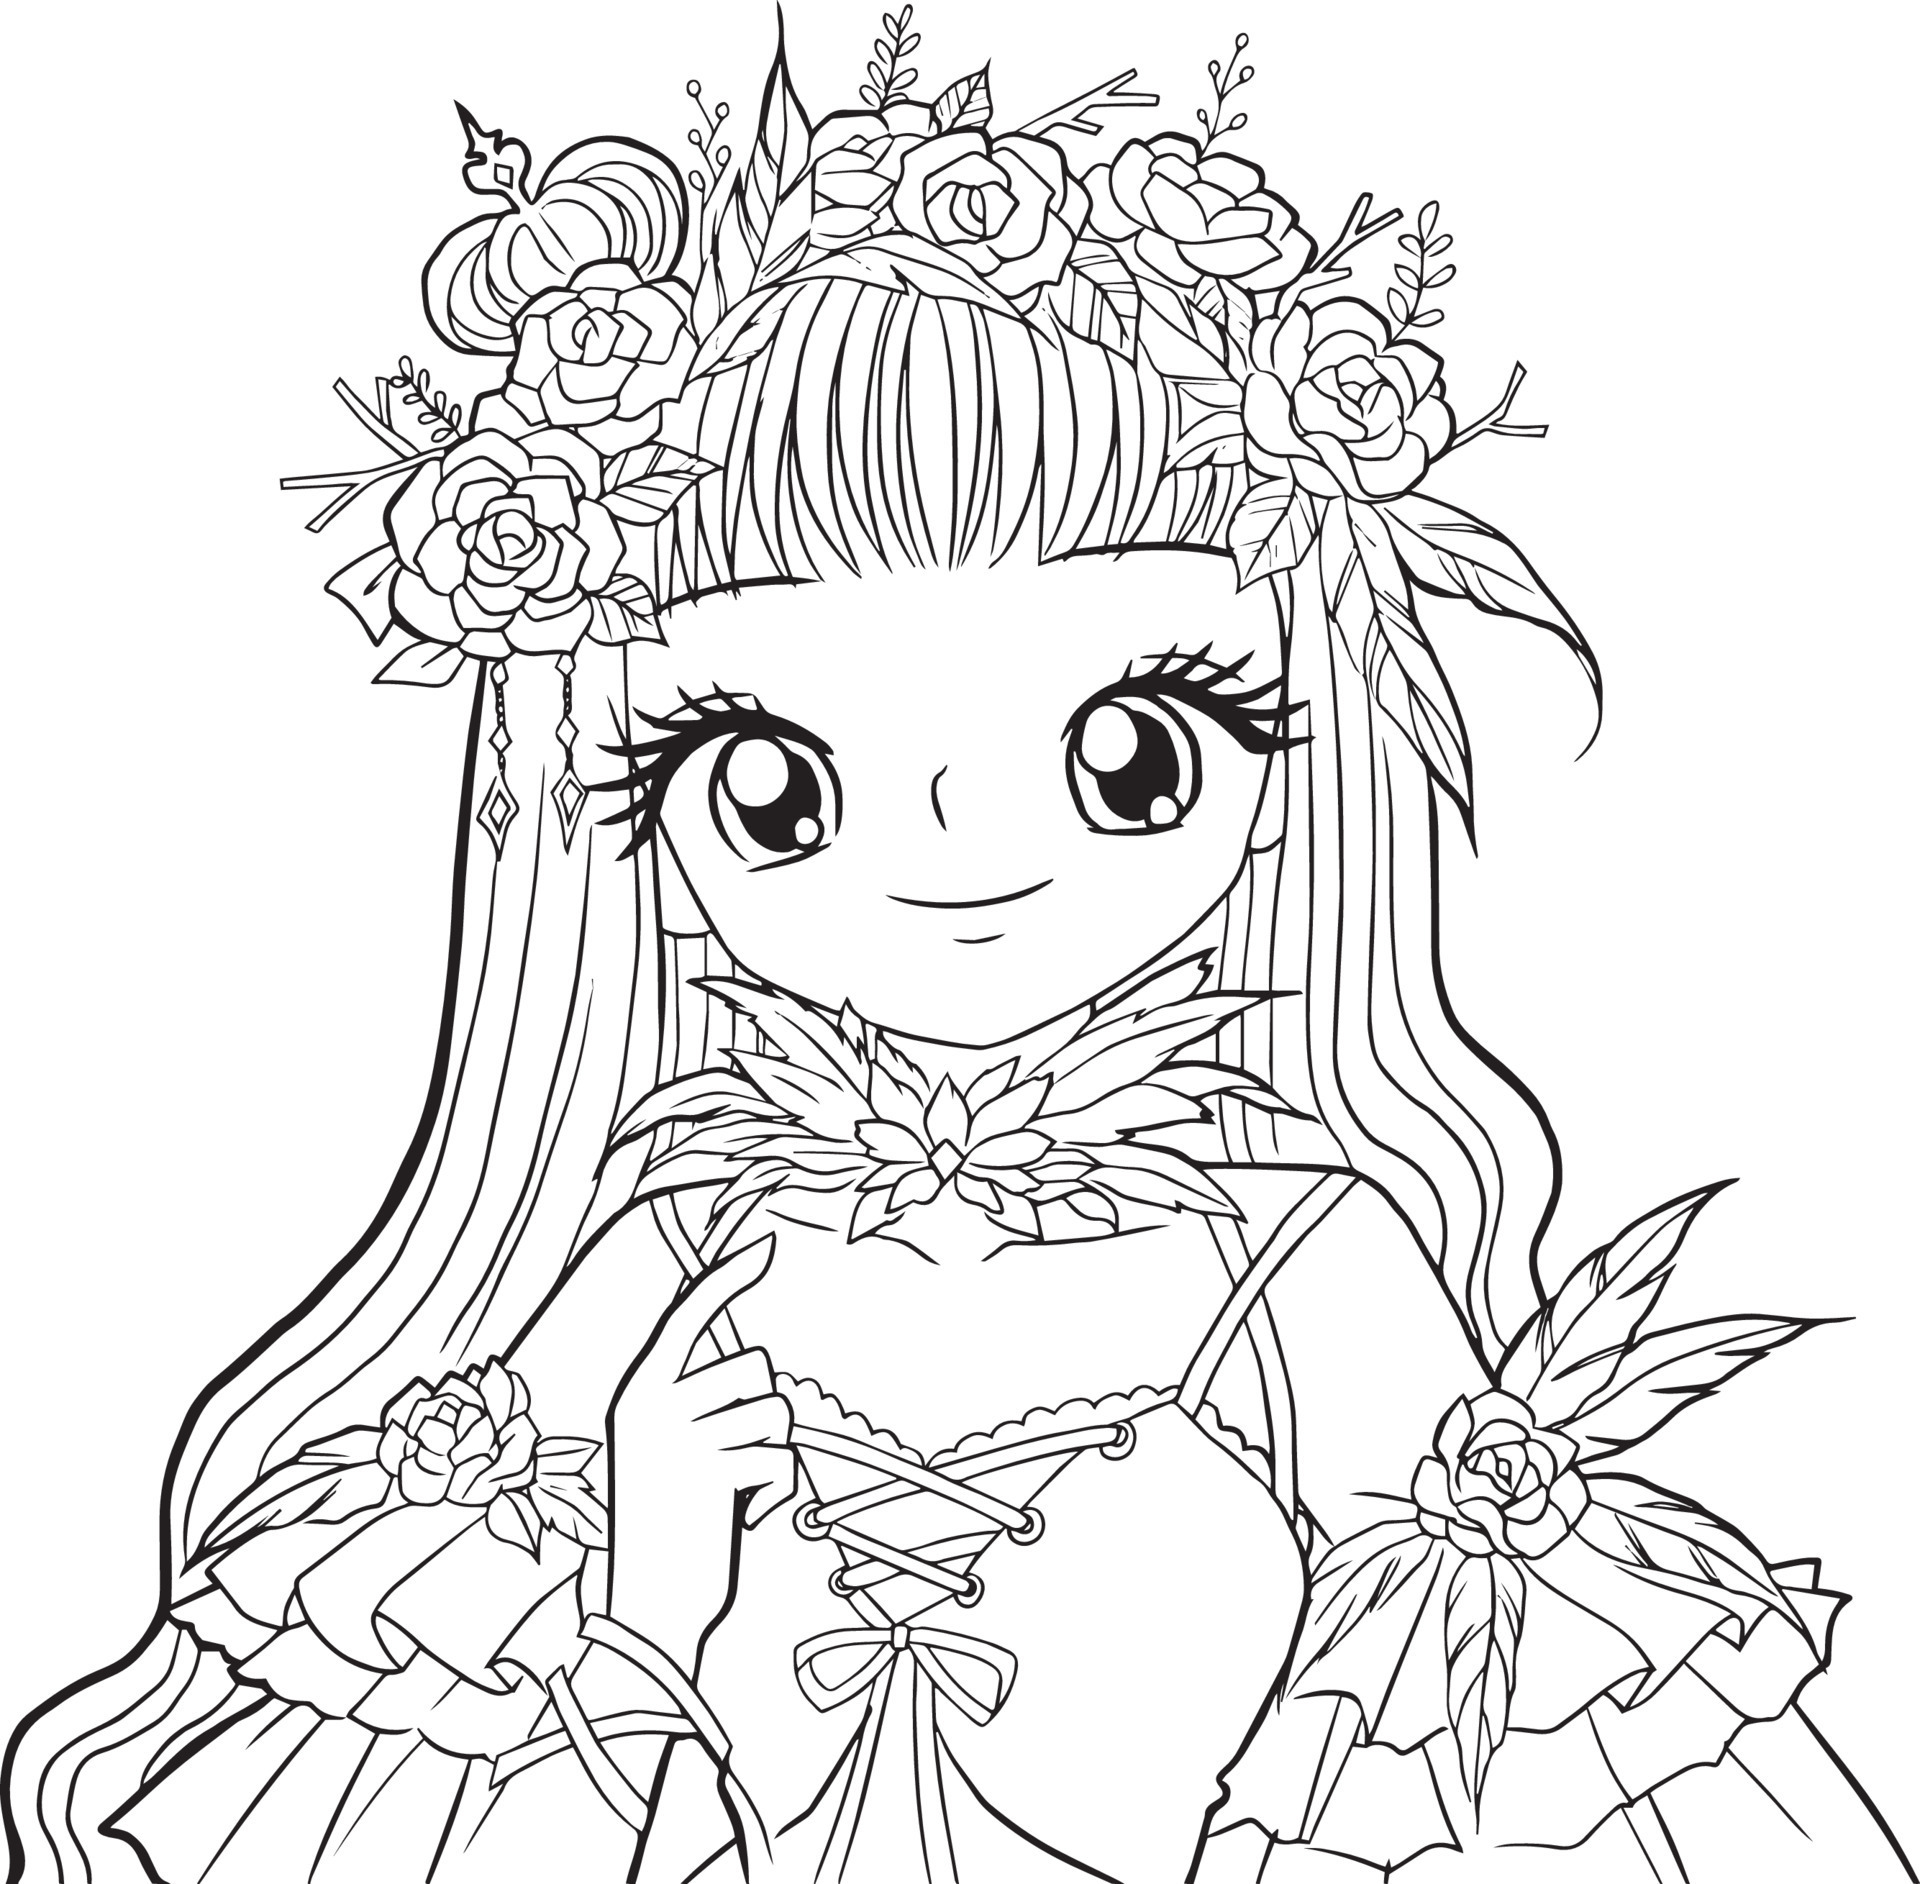 Coloring page girl cartoon anime cute character  Download on Freepik